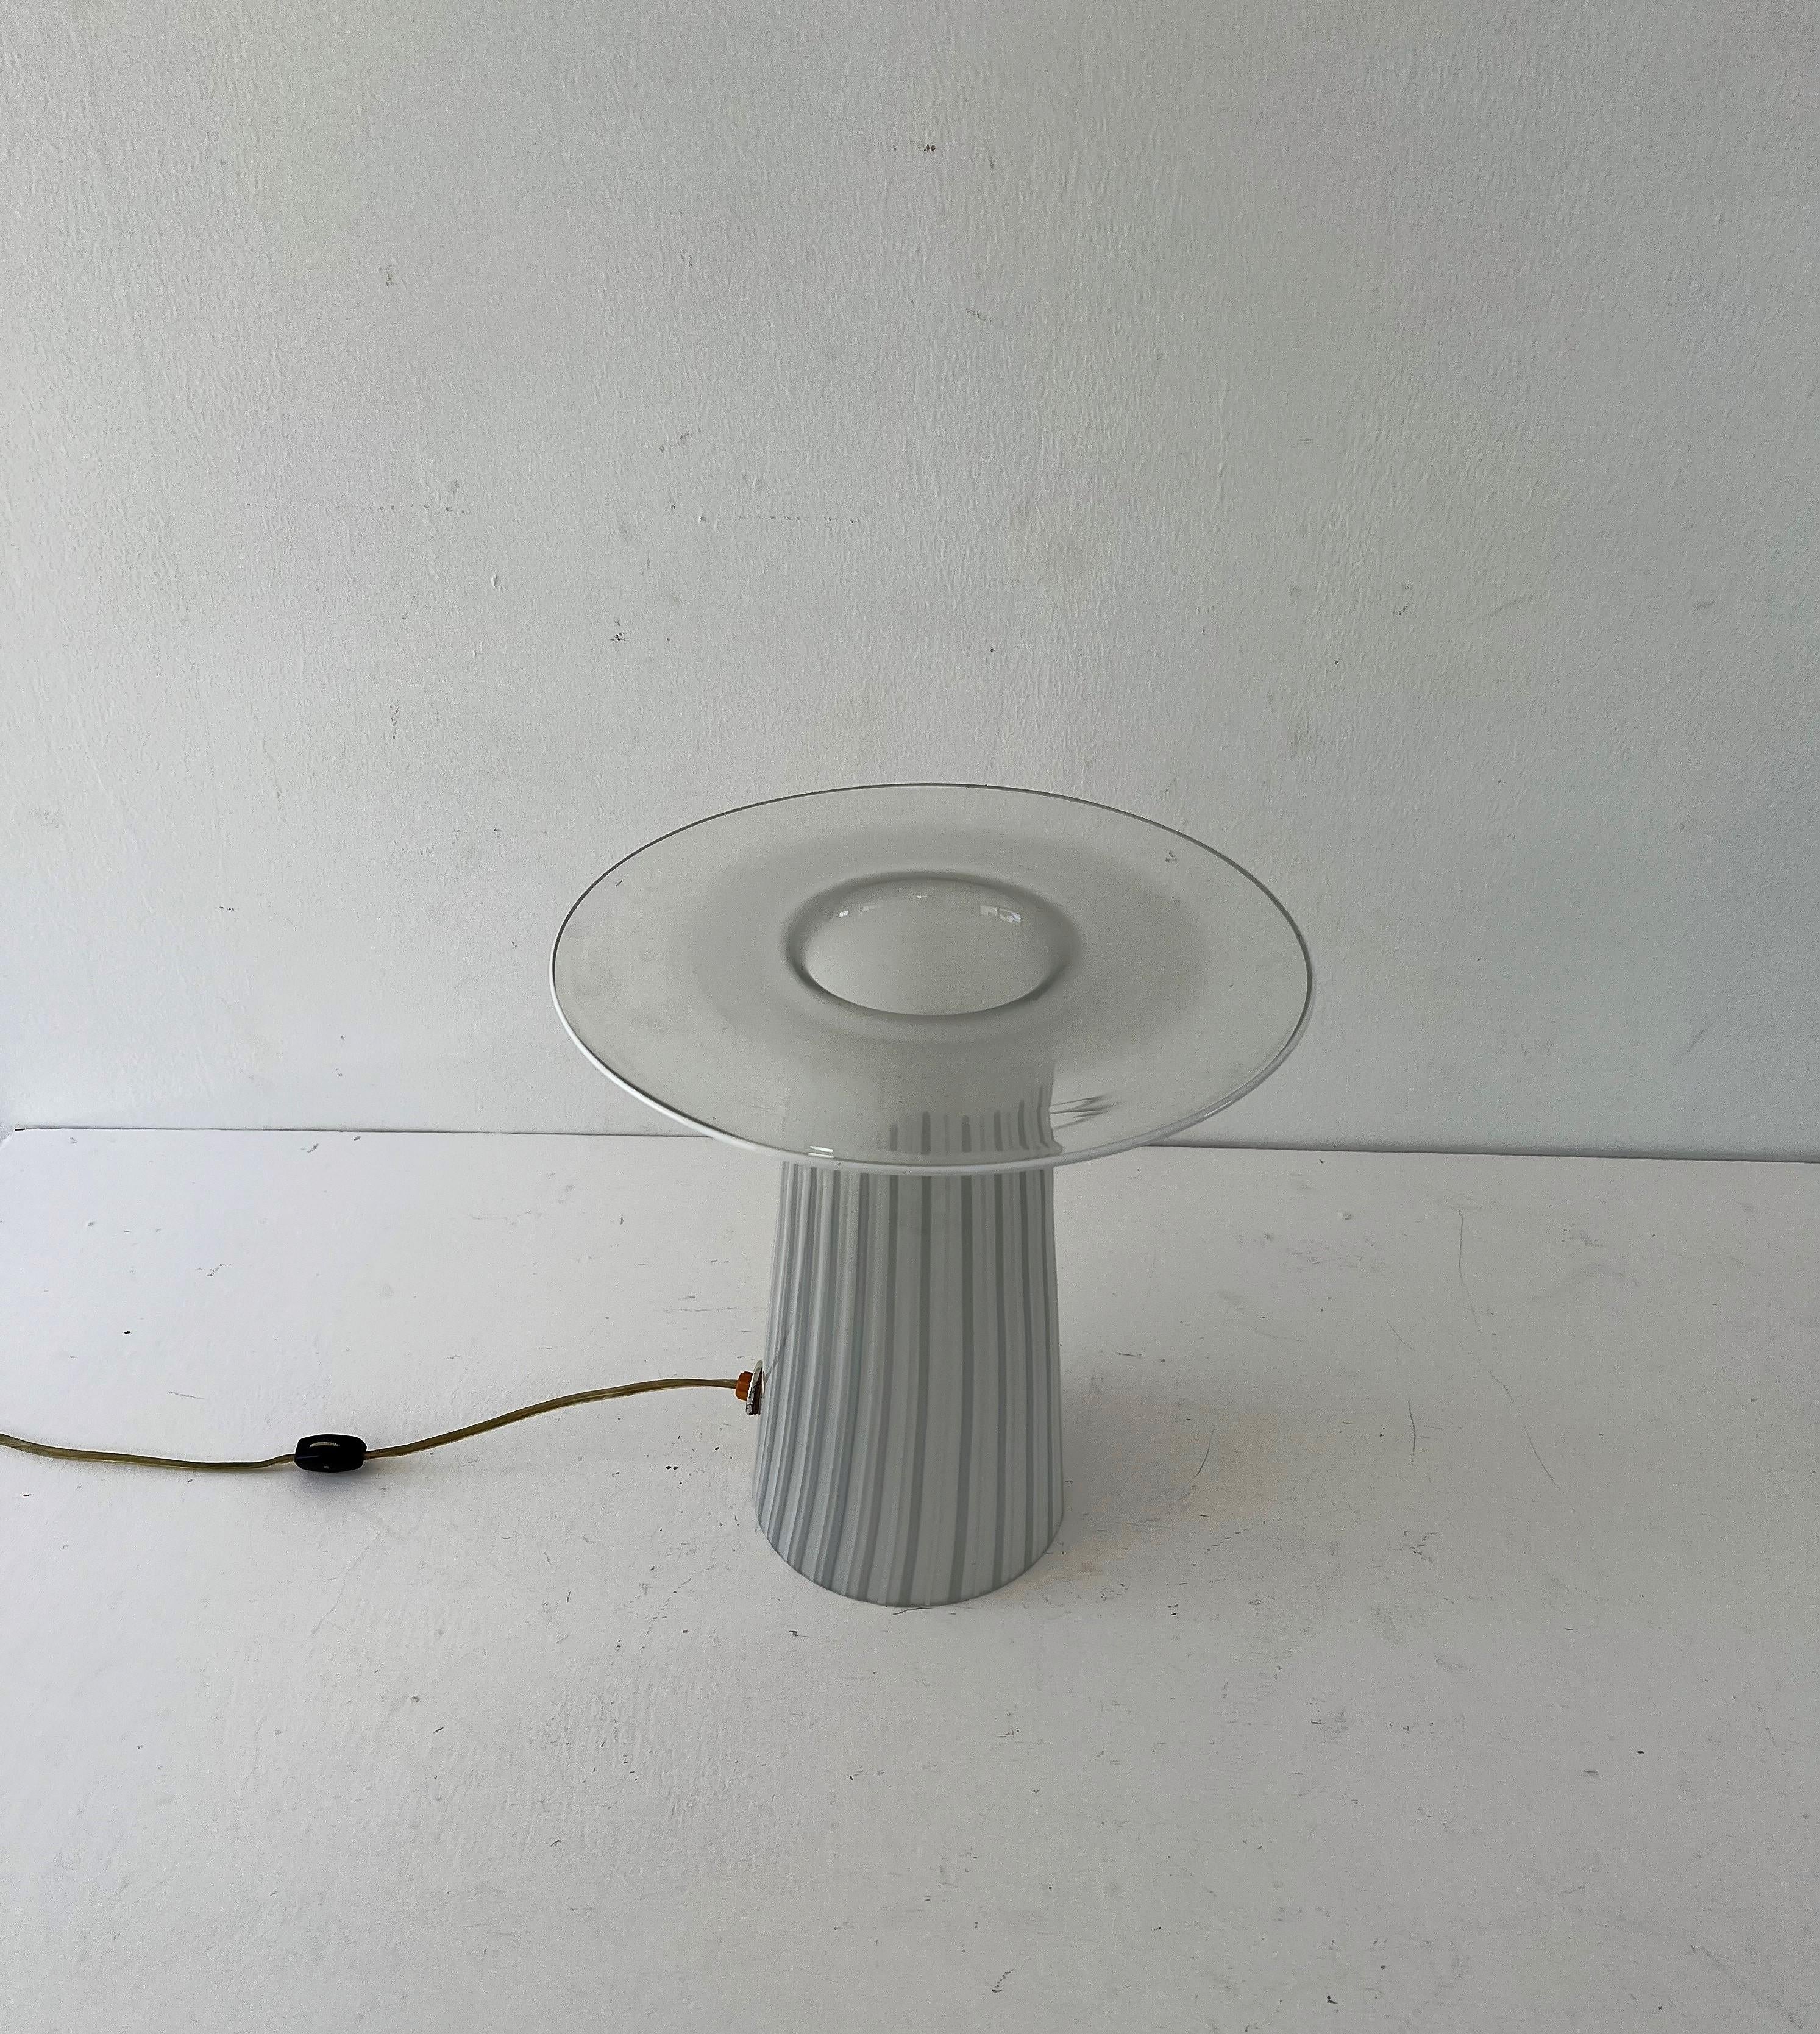 Italian Mid-Century Modern Table Lamp in the Manner of Lino Tagliapietra, Murano 1970s For Sale